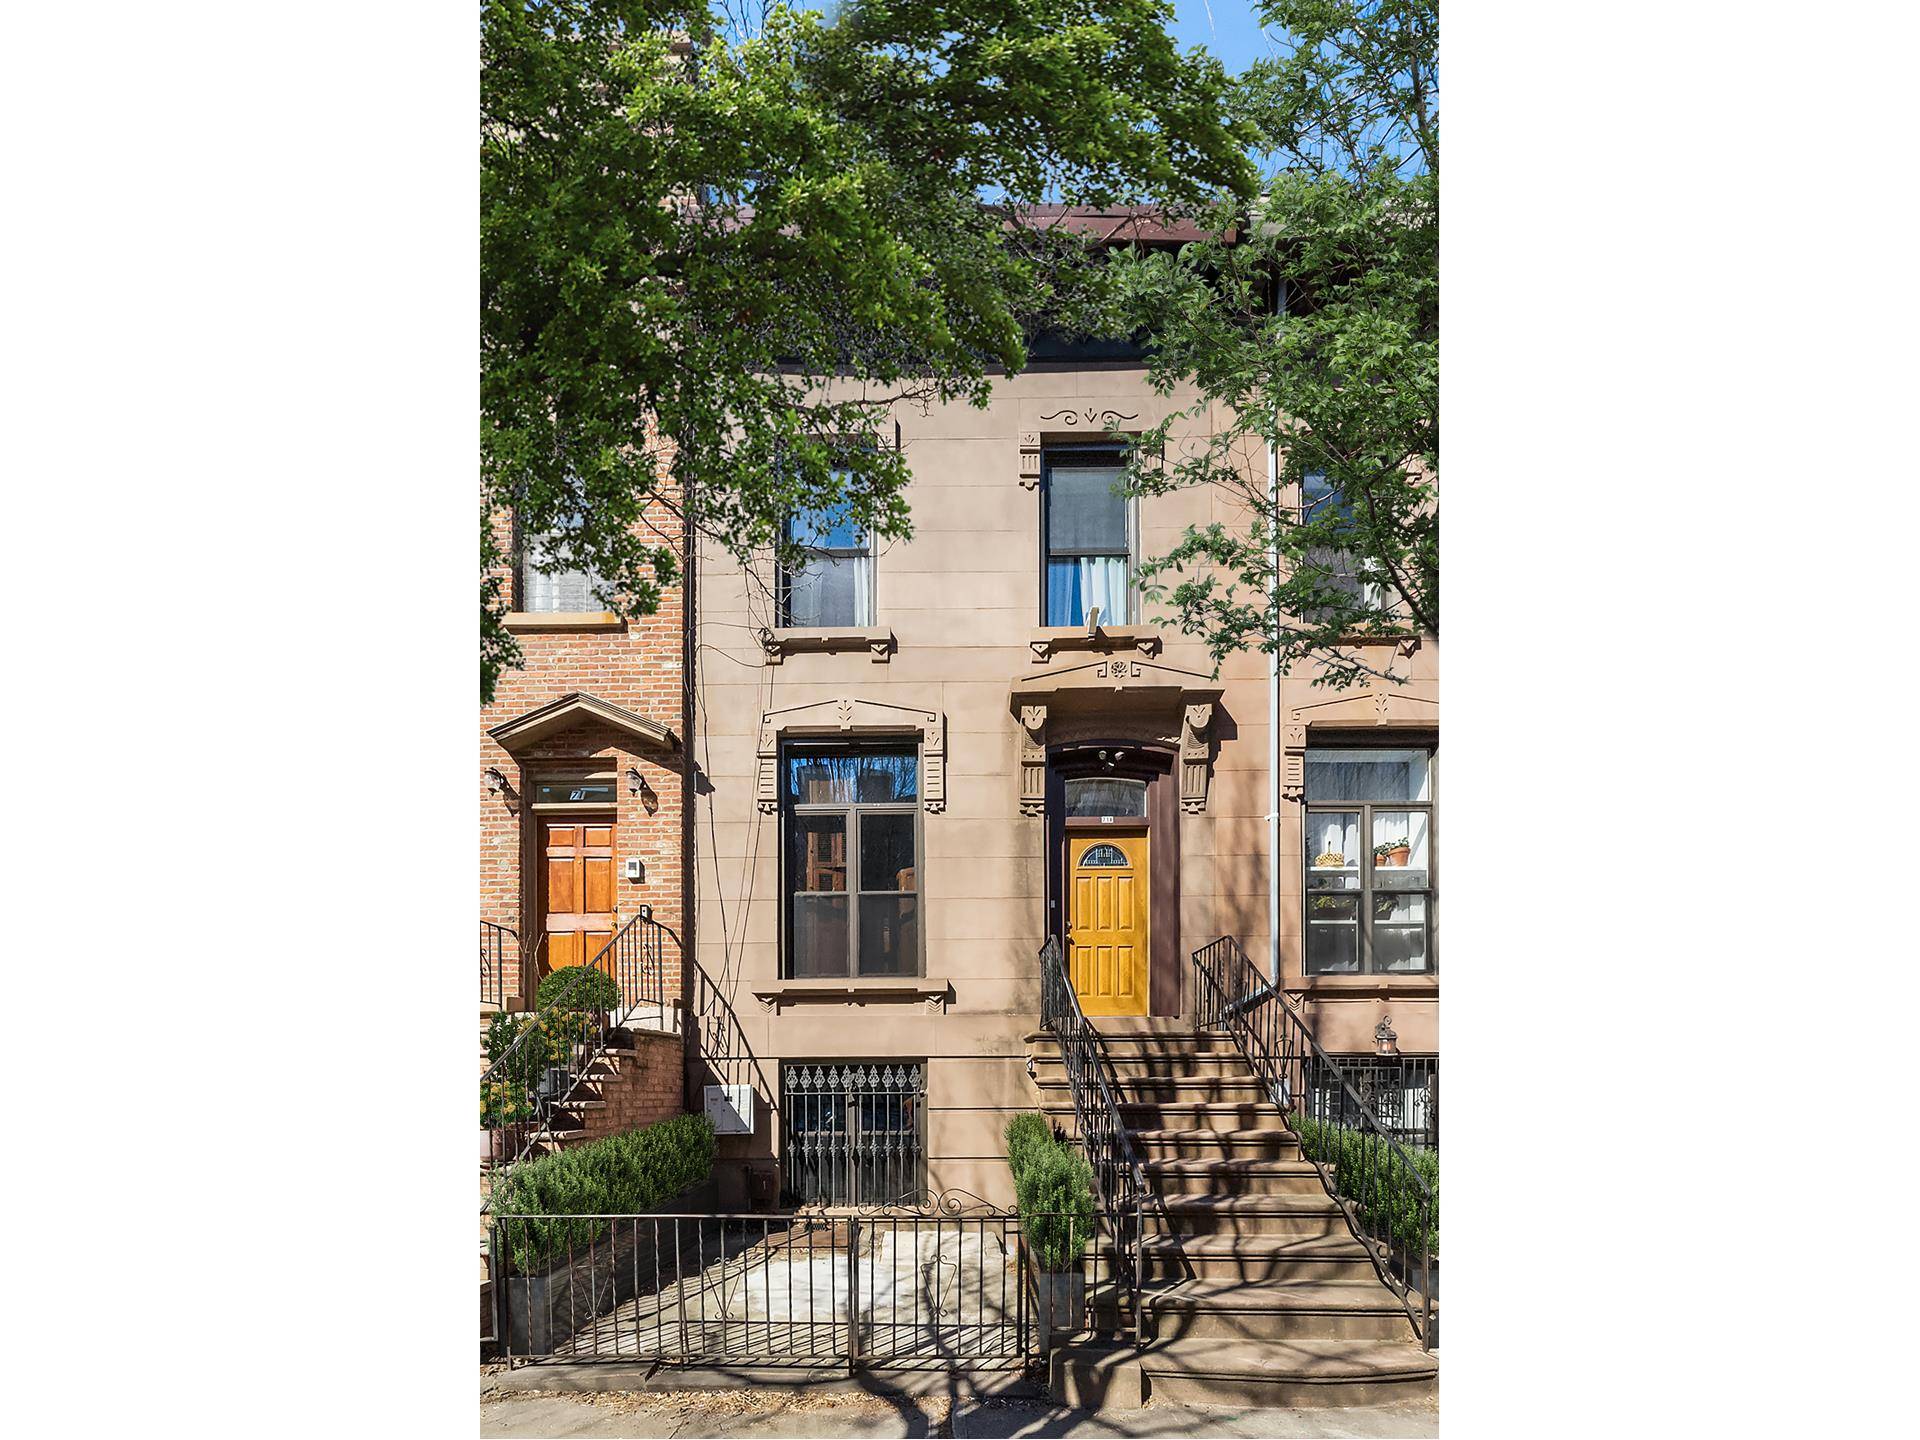 The opportunity is now to own this beautiful 3 family brownstone with private garden access on a charming, quiet, tree lined street between Franklin and Bedford, right along the border ...